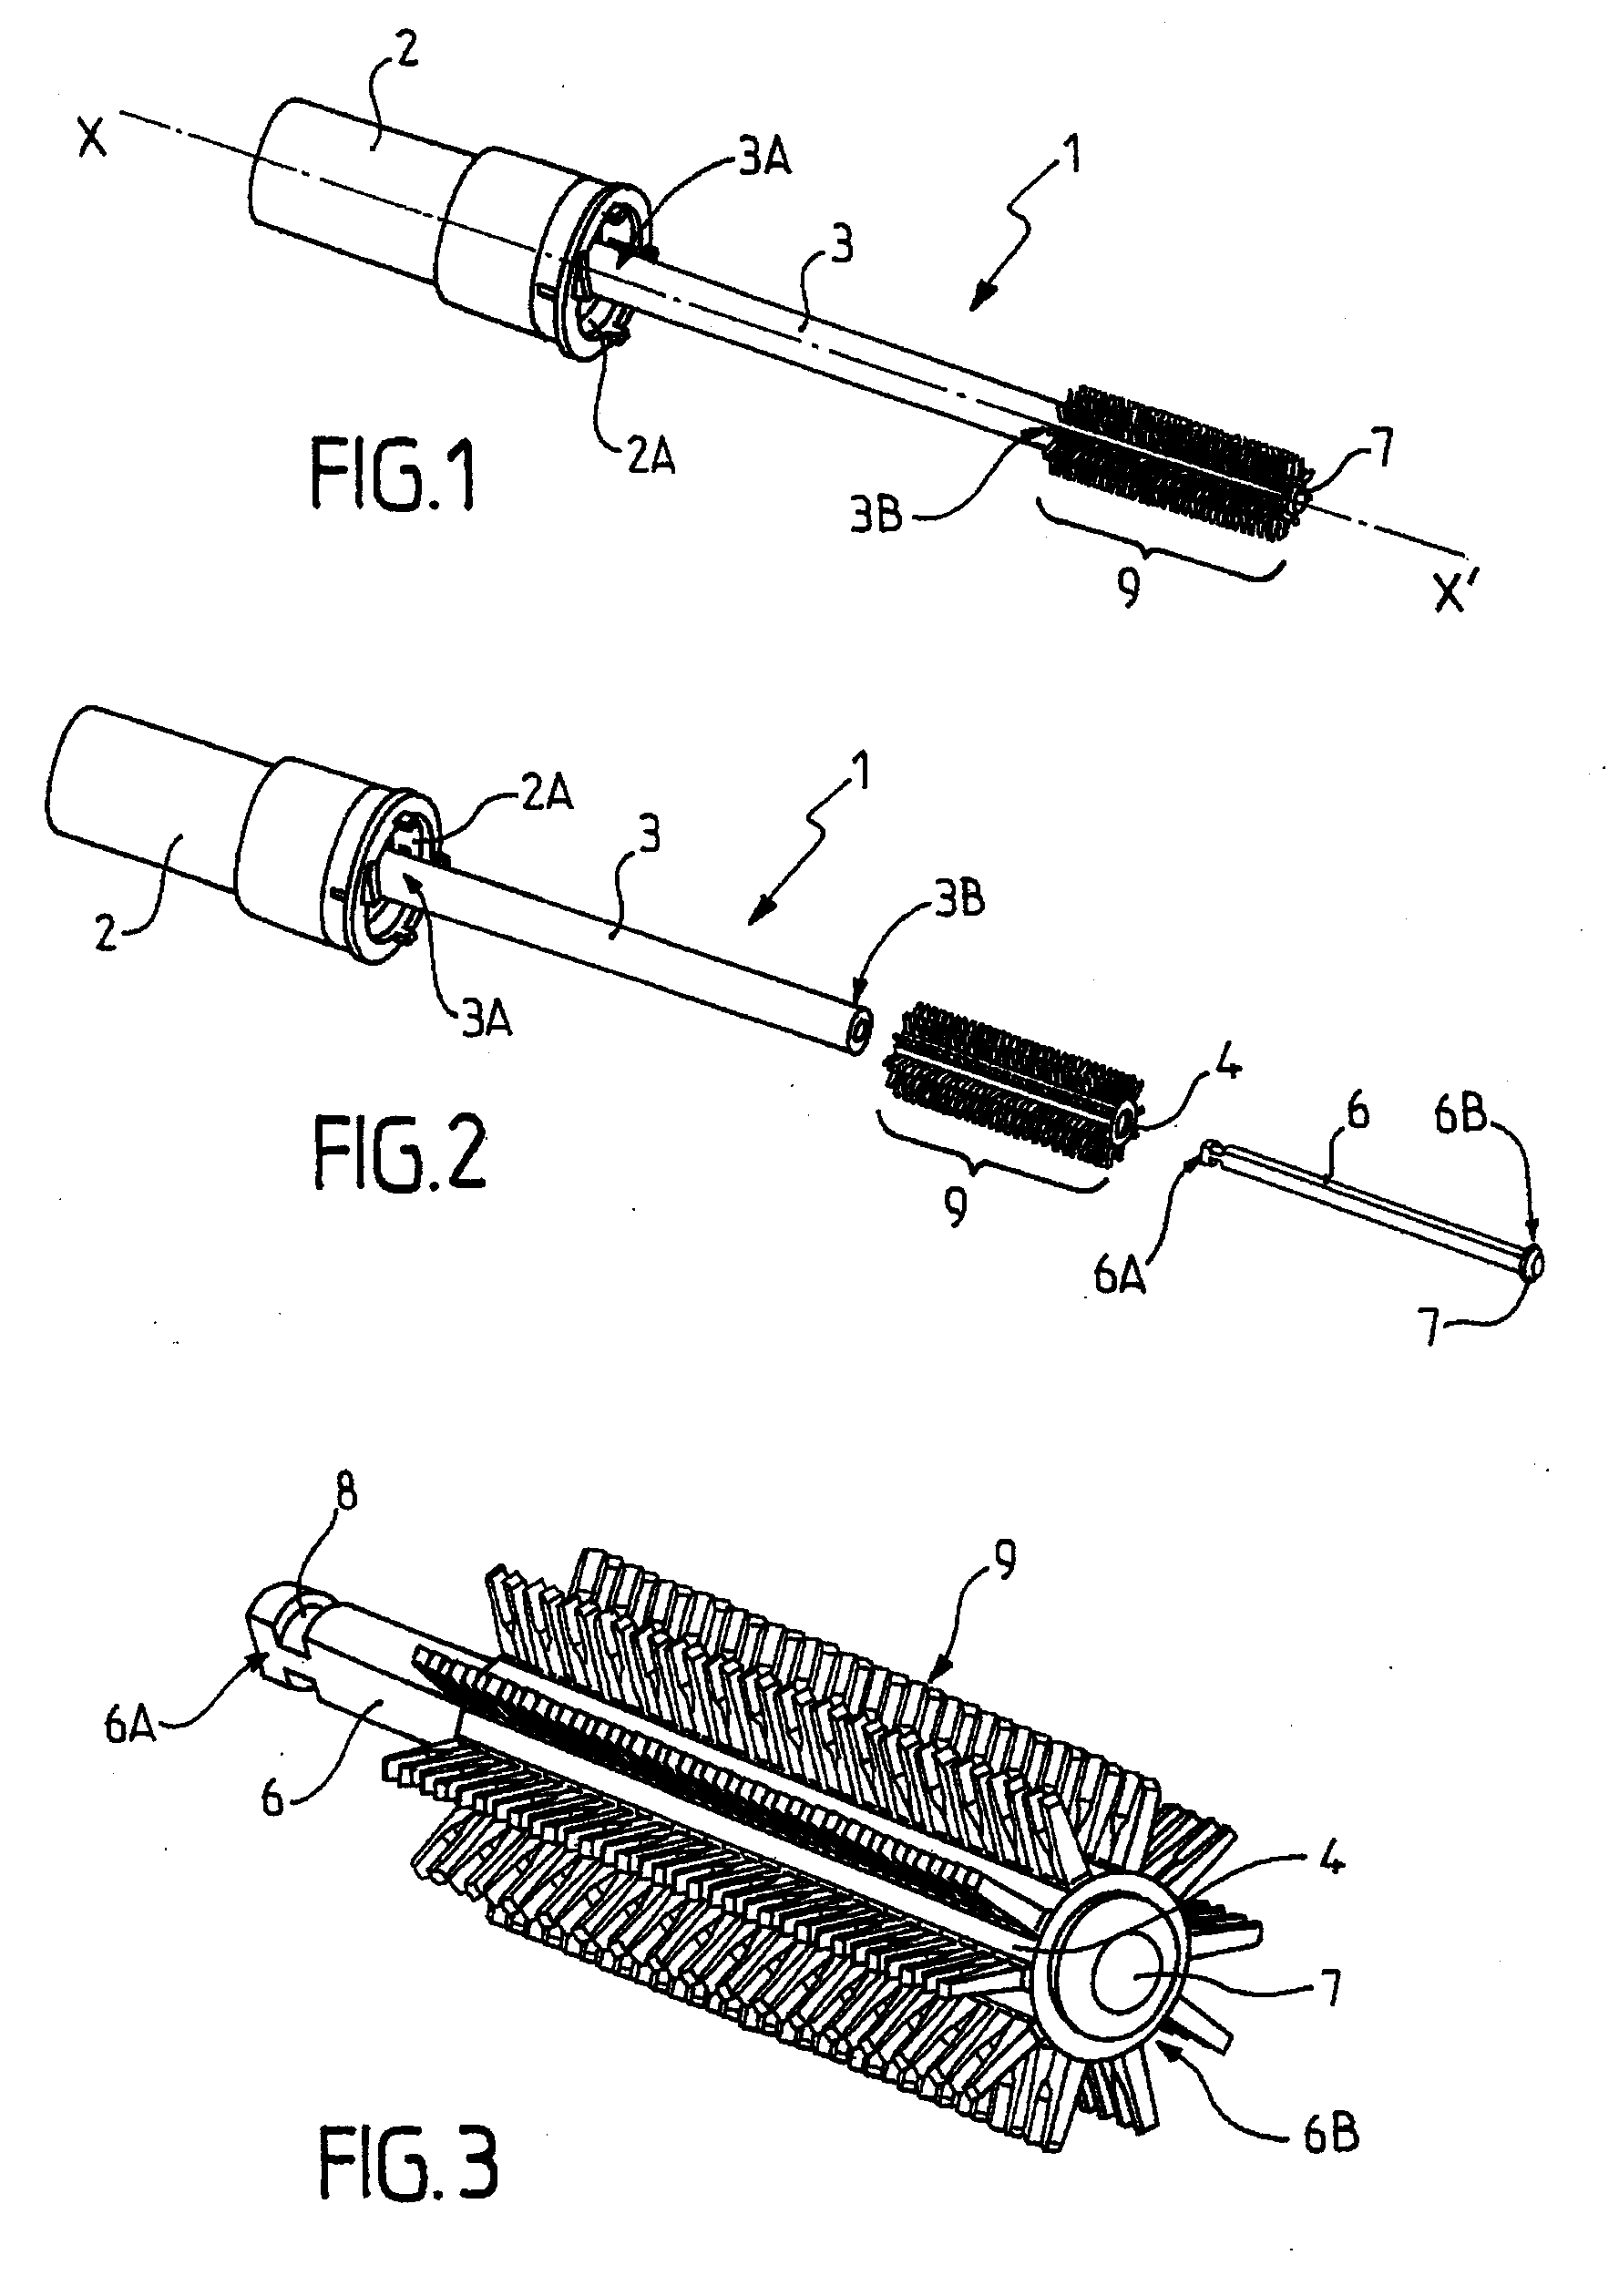 Instrument having walls for applying a composition on eyelashes or eyebrows